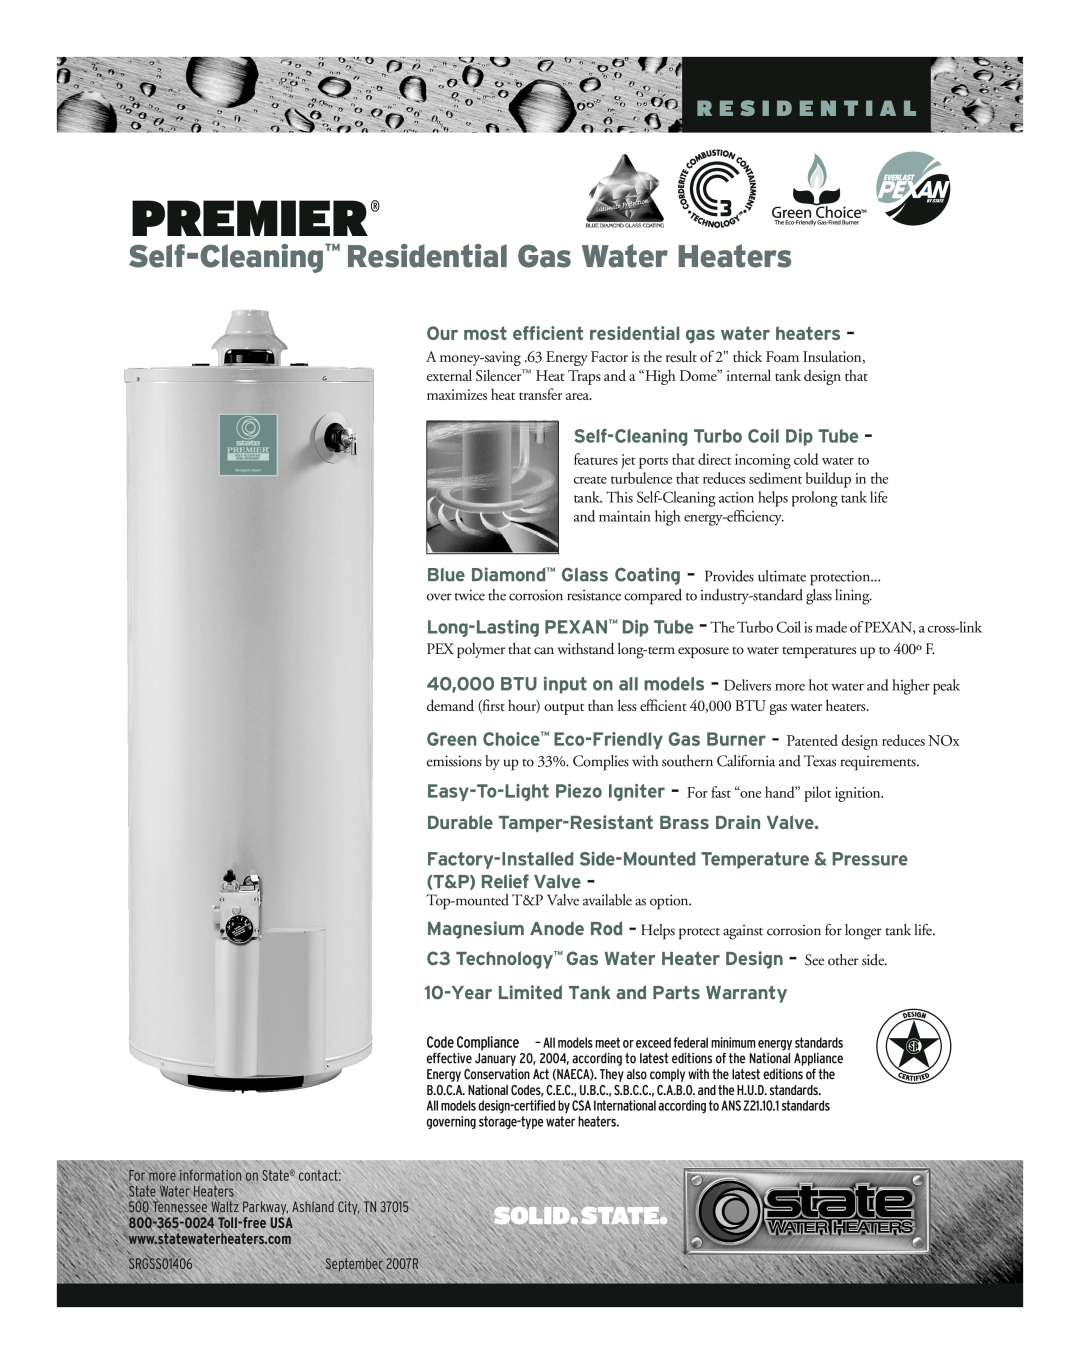 Premier GPX 40 YXRT G, GPX 40 HXRT warranty Premier, Self-Cleaning Residential Gas Water Heaters, R E S I D E N T I A L 